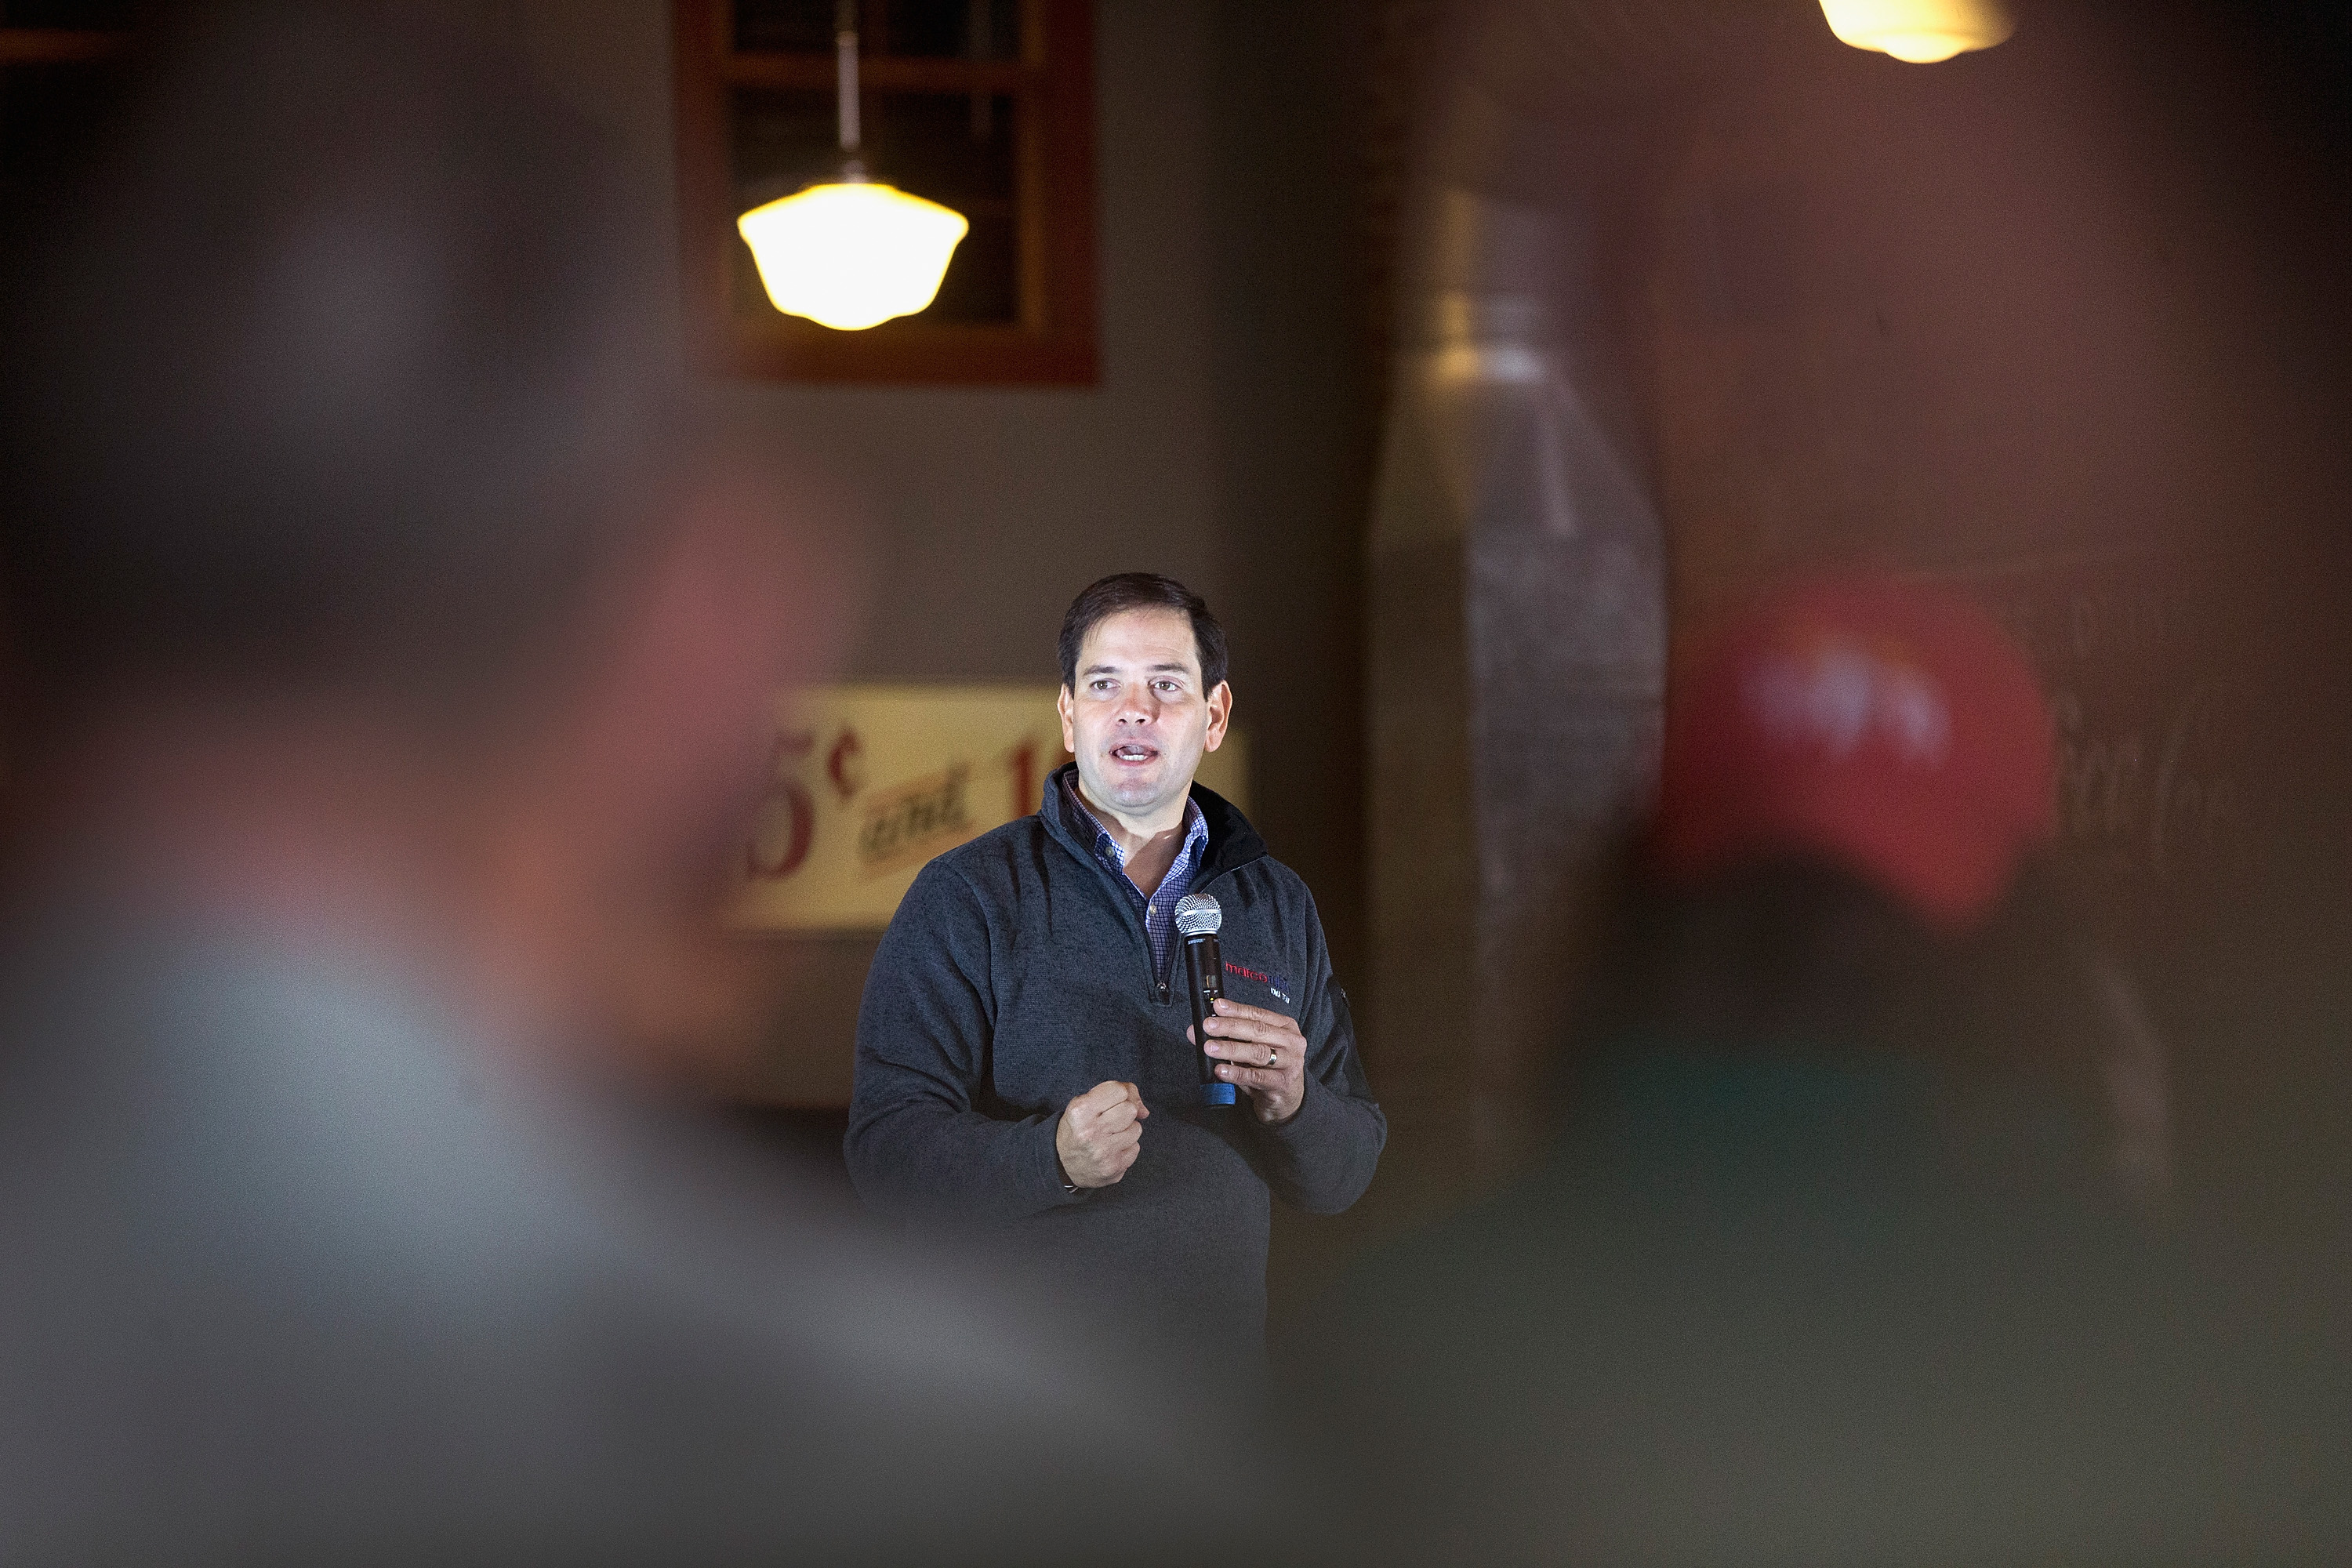 Republican presidential candidate Sen. Marco Rubio speaks to guests during a campaign stop at Smokey Row Coffee House in Oskaloosa, Iowa on  Nov. 21, 2015. (Scott Olson—Getty Images)